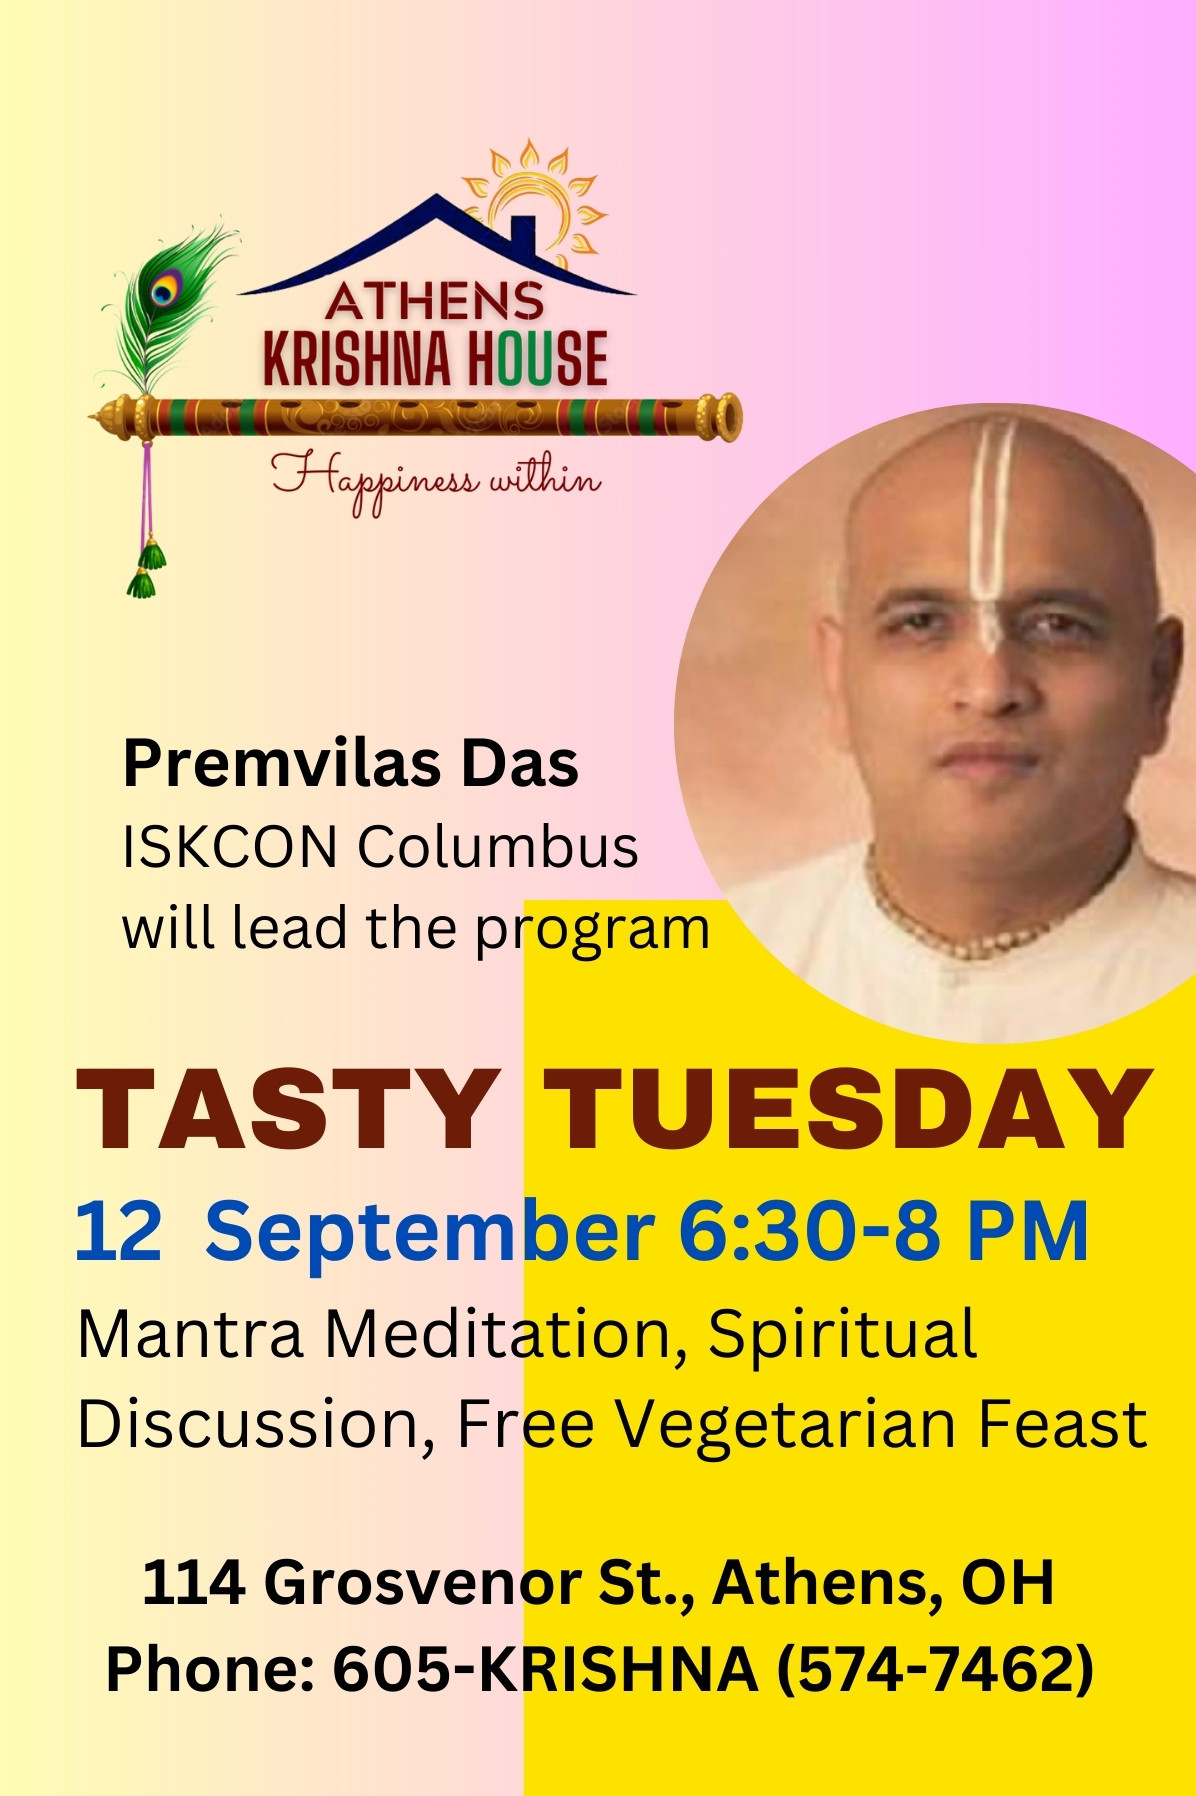 Athens Krishna House presents Tasty Tuesday Tuesday September 12, 2023. The event is 6:30 p.m. to 8 p.m. and features a mantra meditation, vegetarian feast and spiritual discussion. The event will be led by Premlivas Das from ISKCON Columbus. 